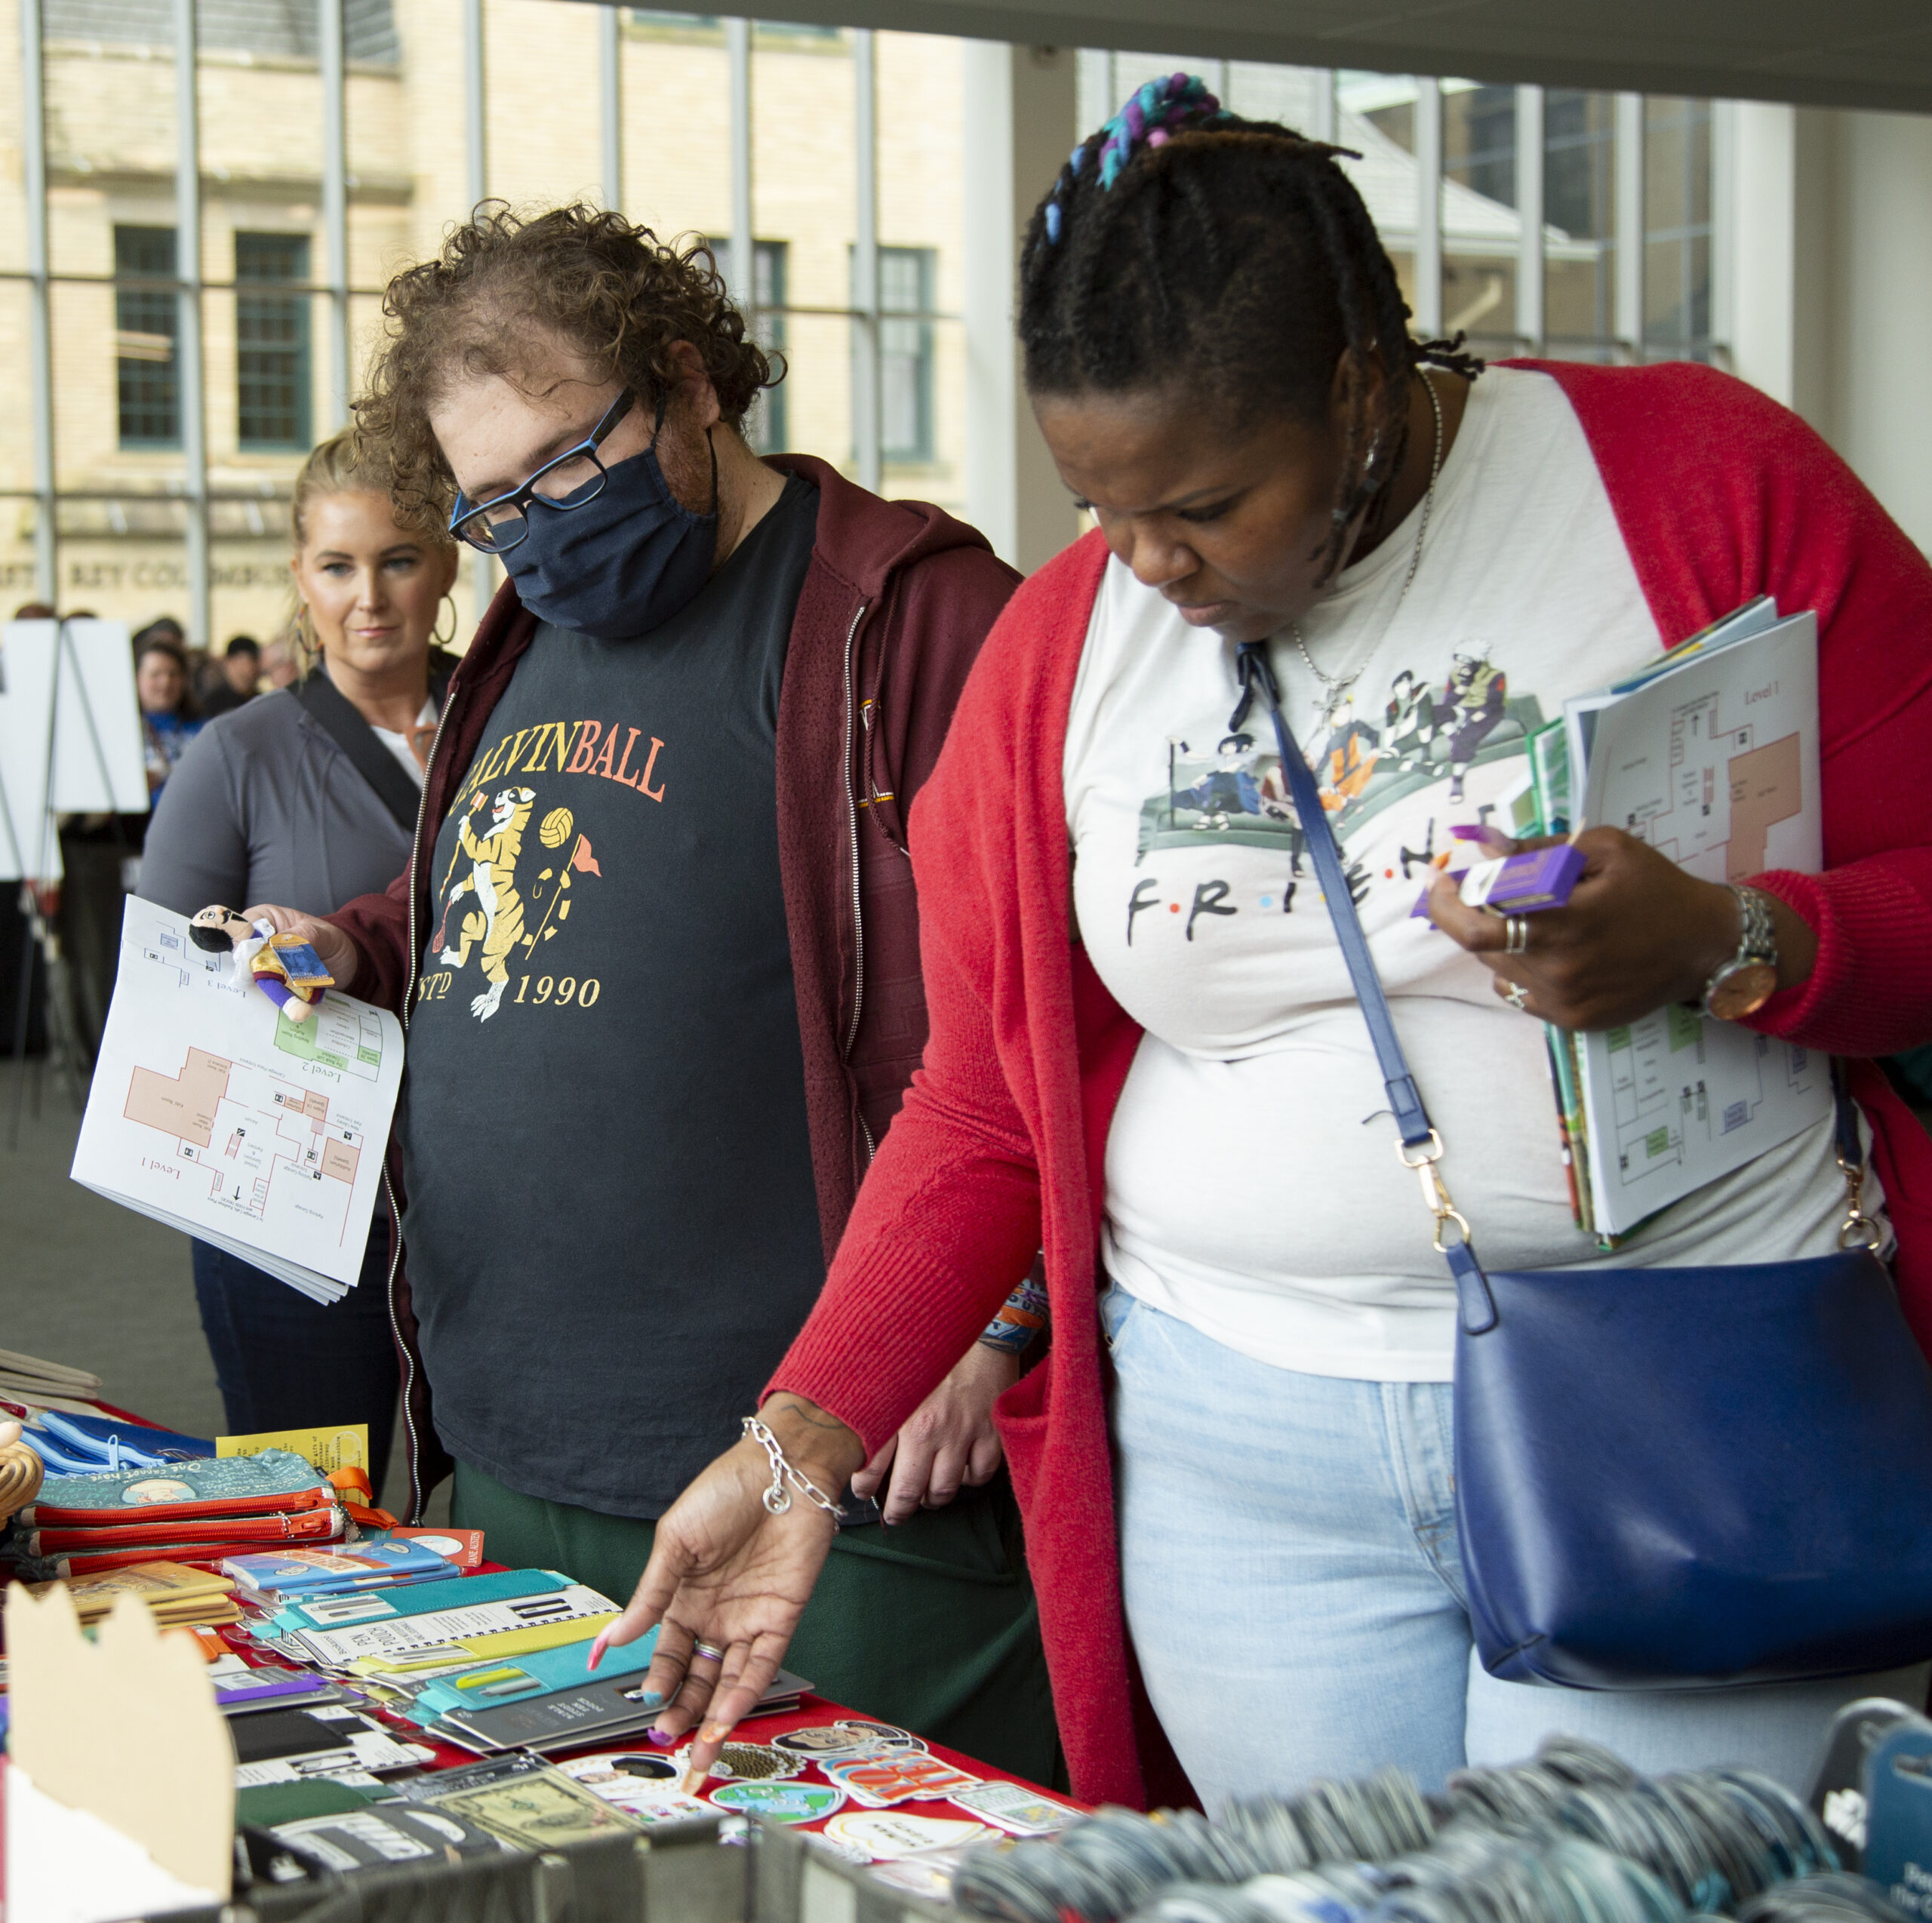 Festival attendees browse through some books.